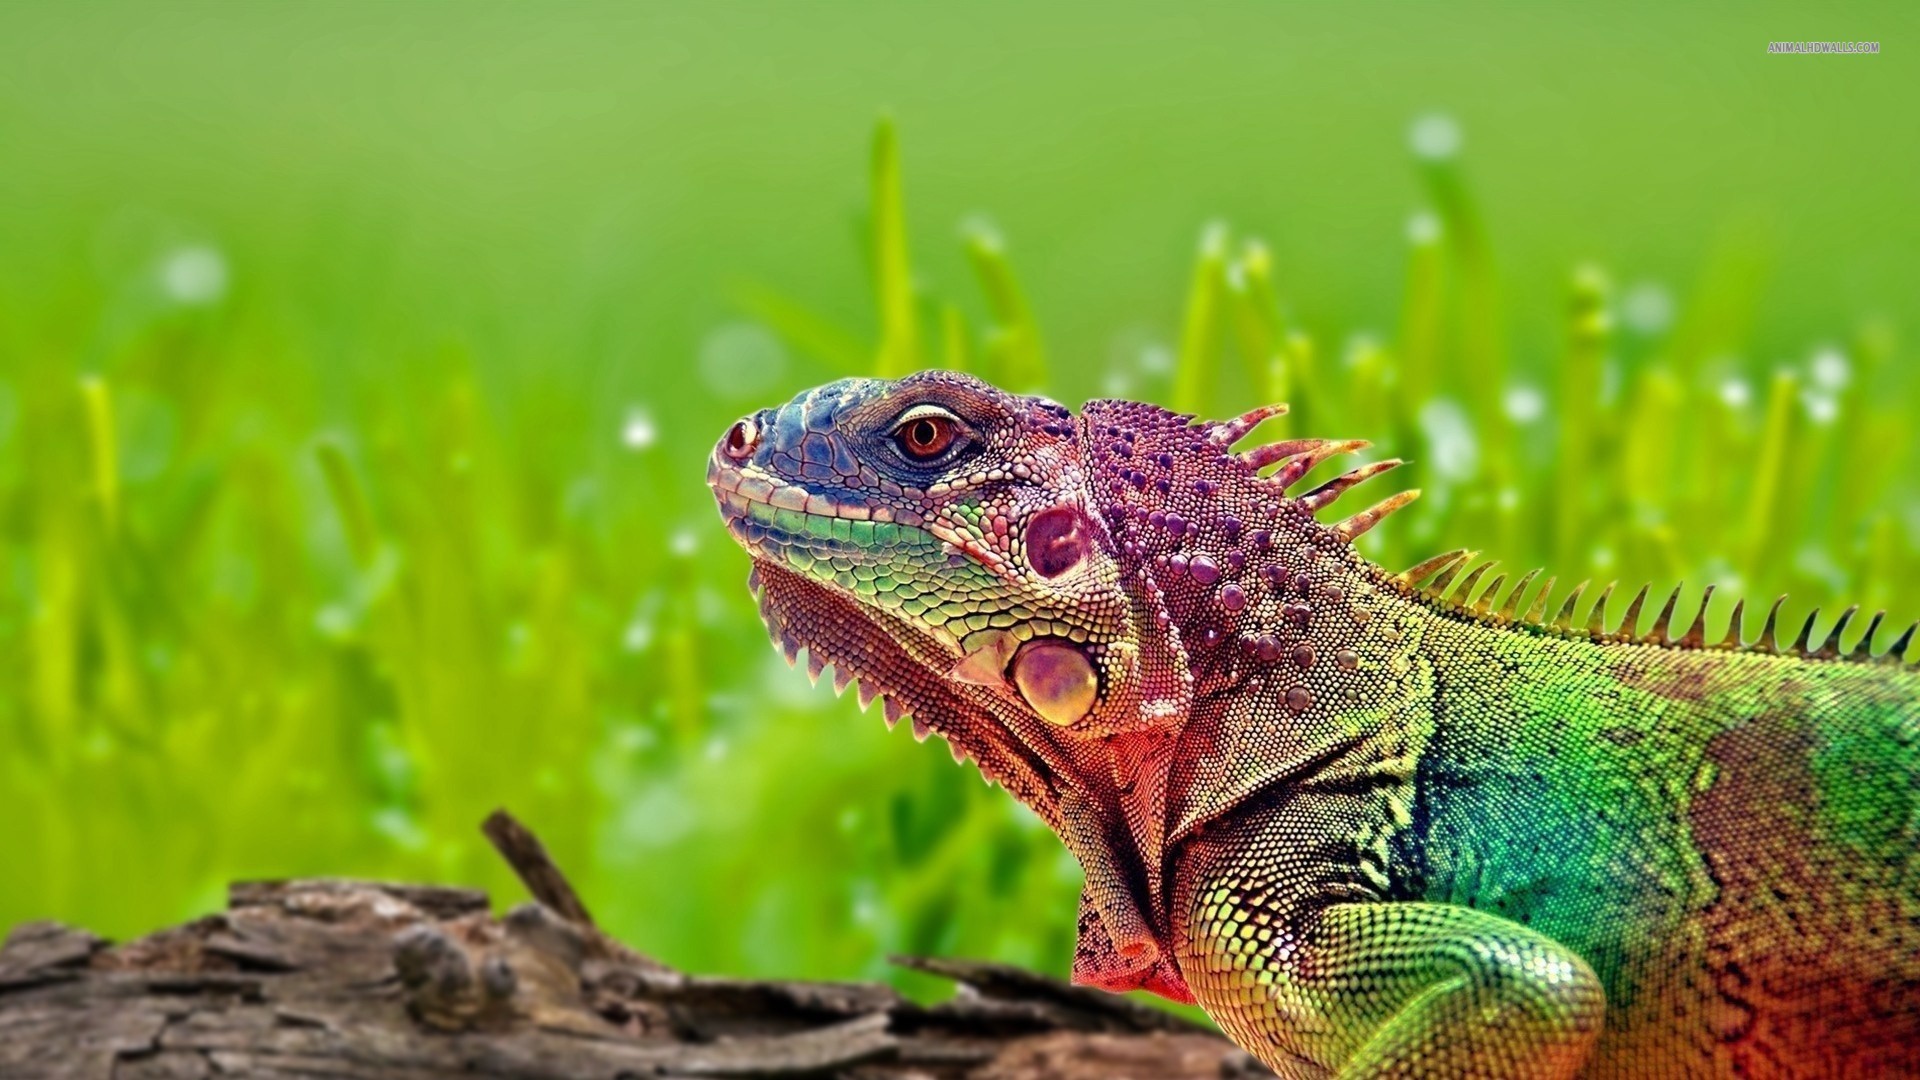 General 1920x1080 animals colorful nature lizards green background